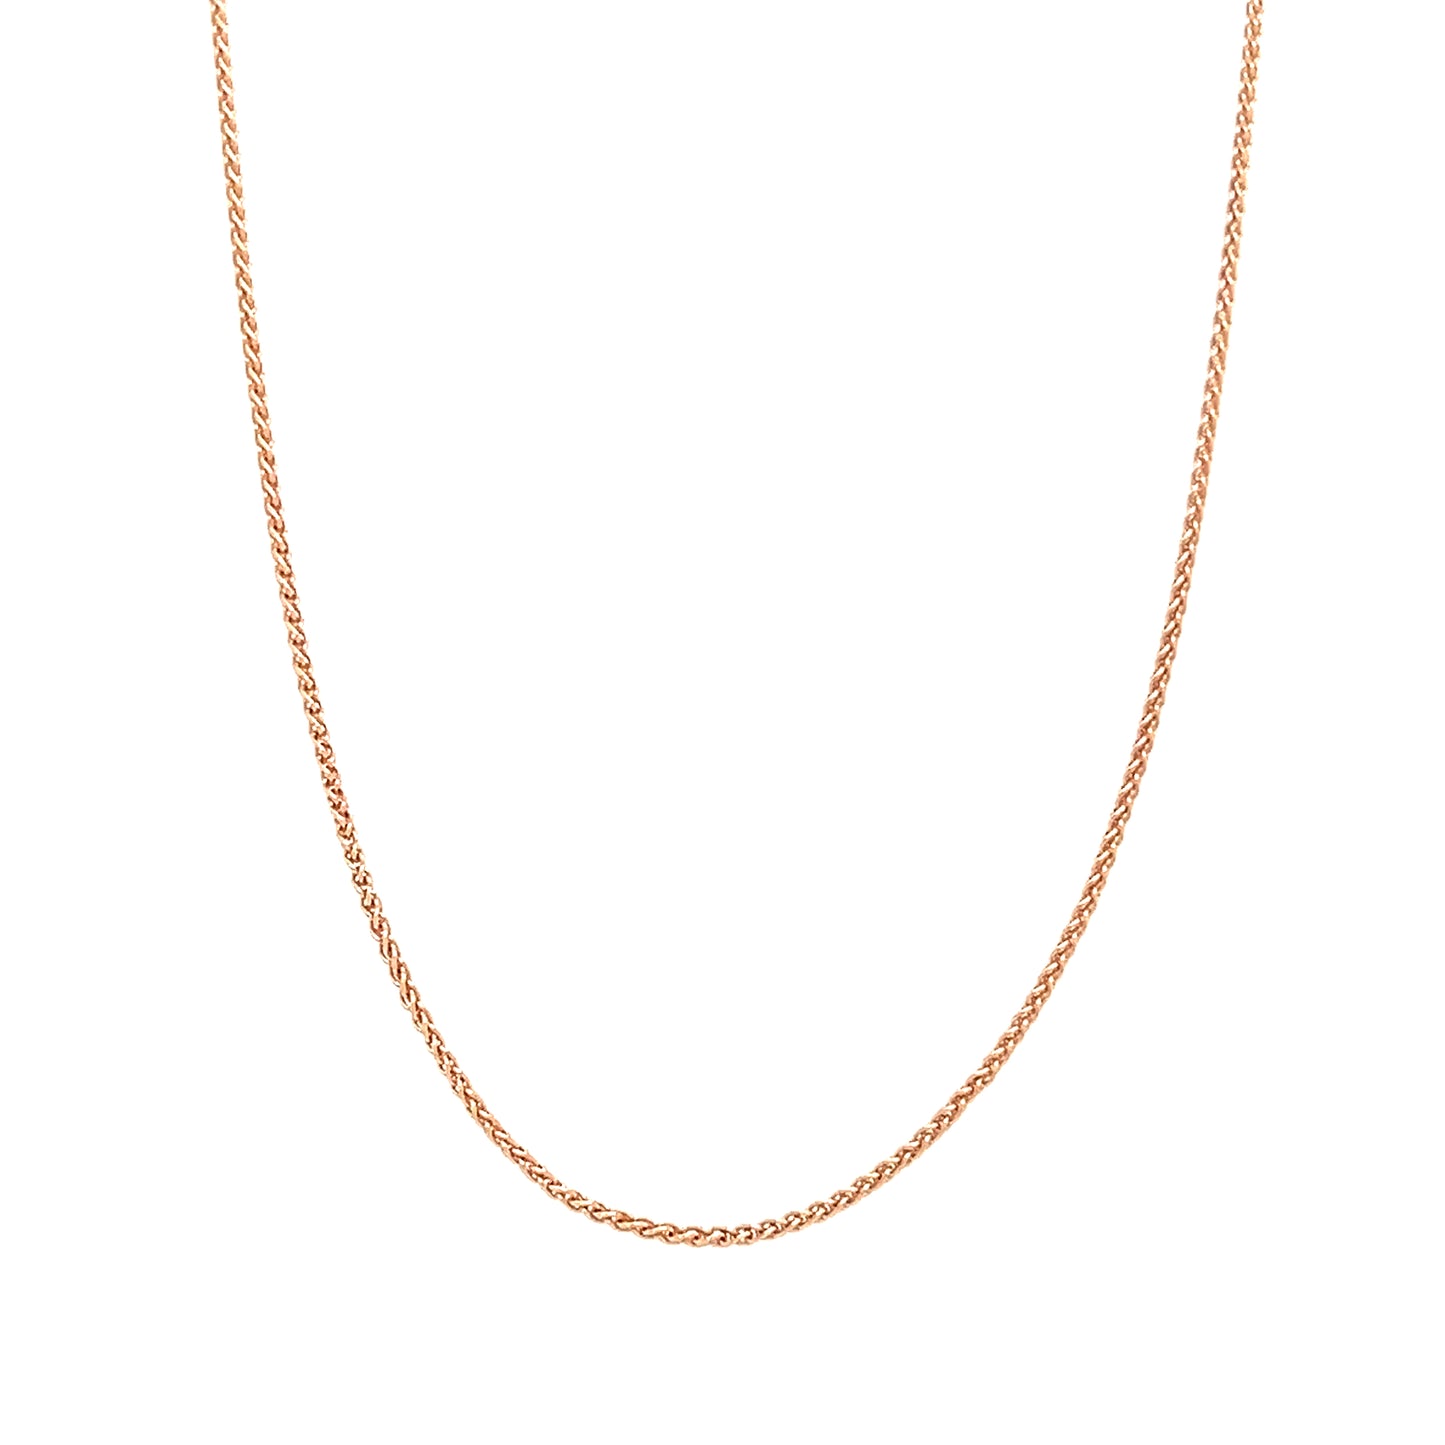 Wheat Chain 1.05mm with 18 Inches of Length in 14K Rose Gold Chain Front View